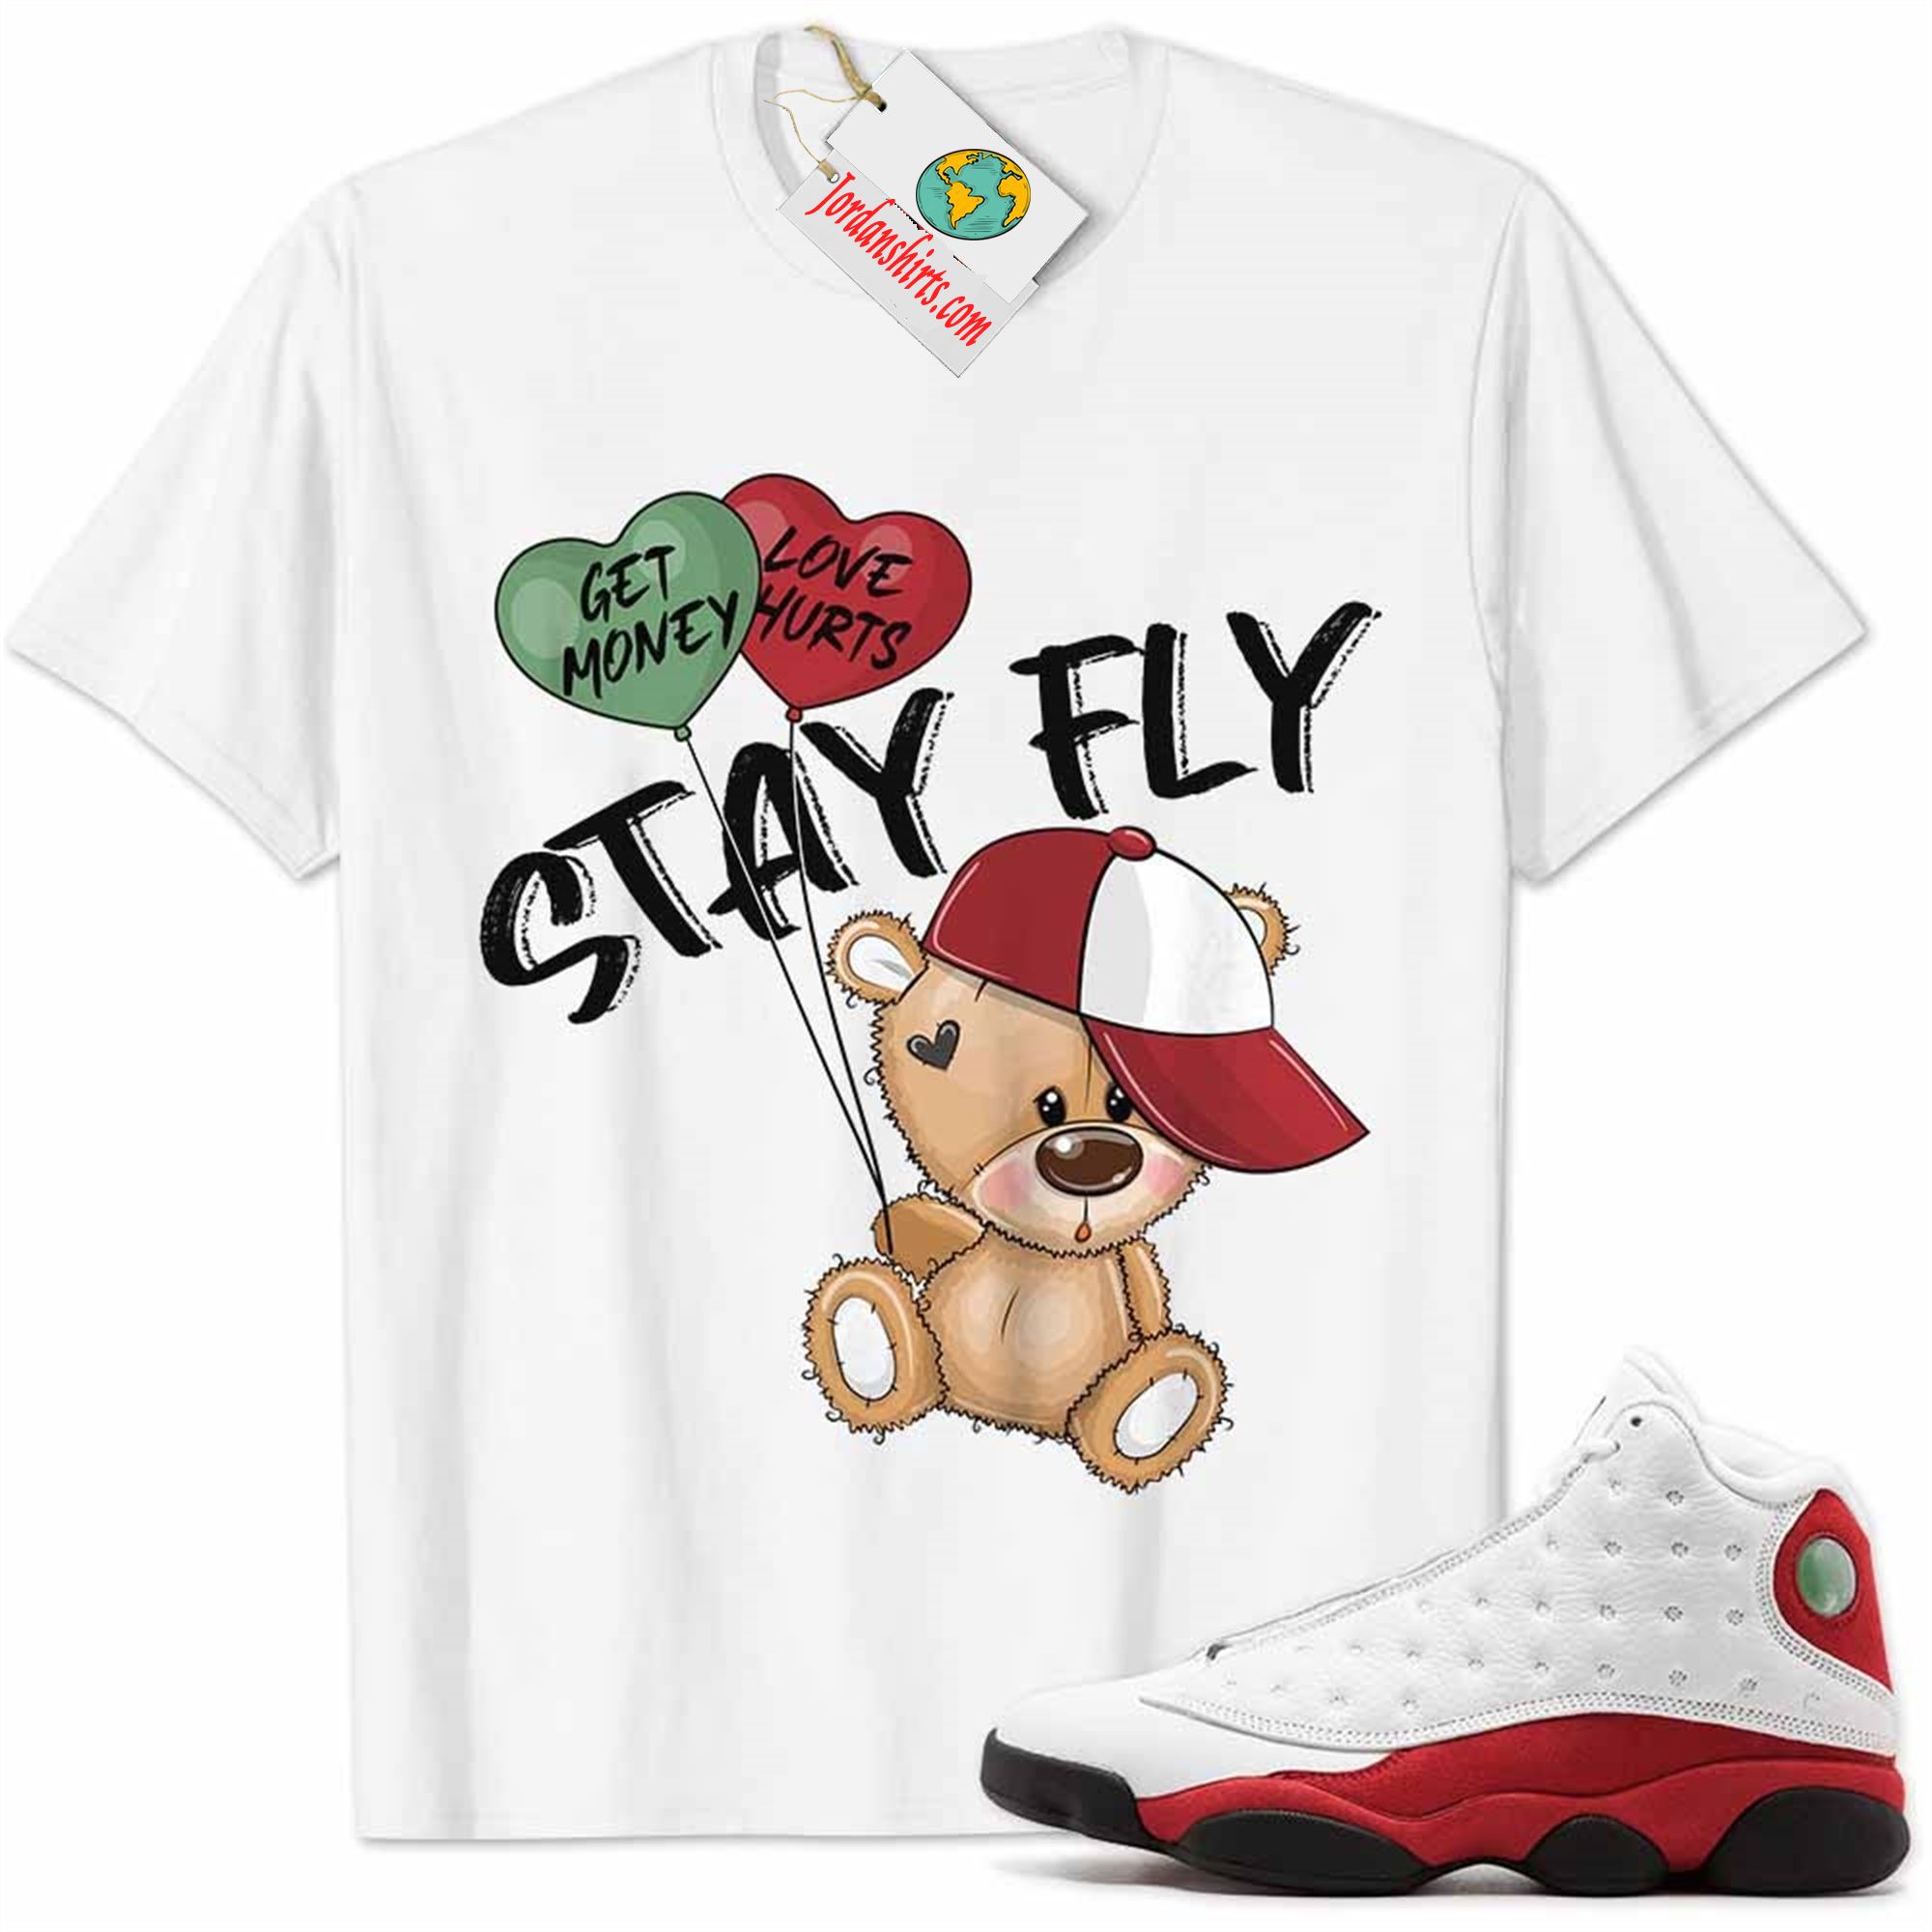 Jordan 13 Shirt, Chicago 13s Shirt Cute Teddy Bear Stay Fly Get Money White Plus Size Up To 5xl